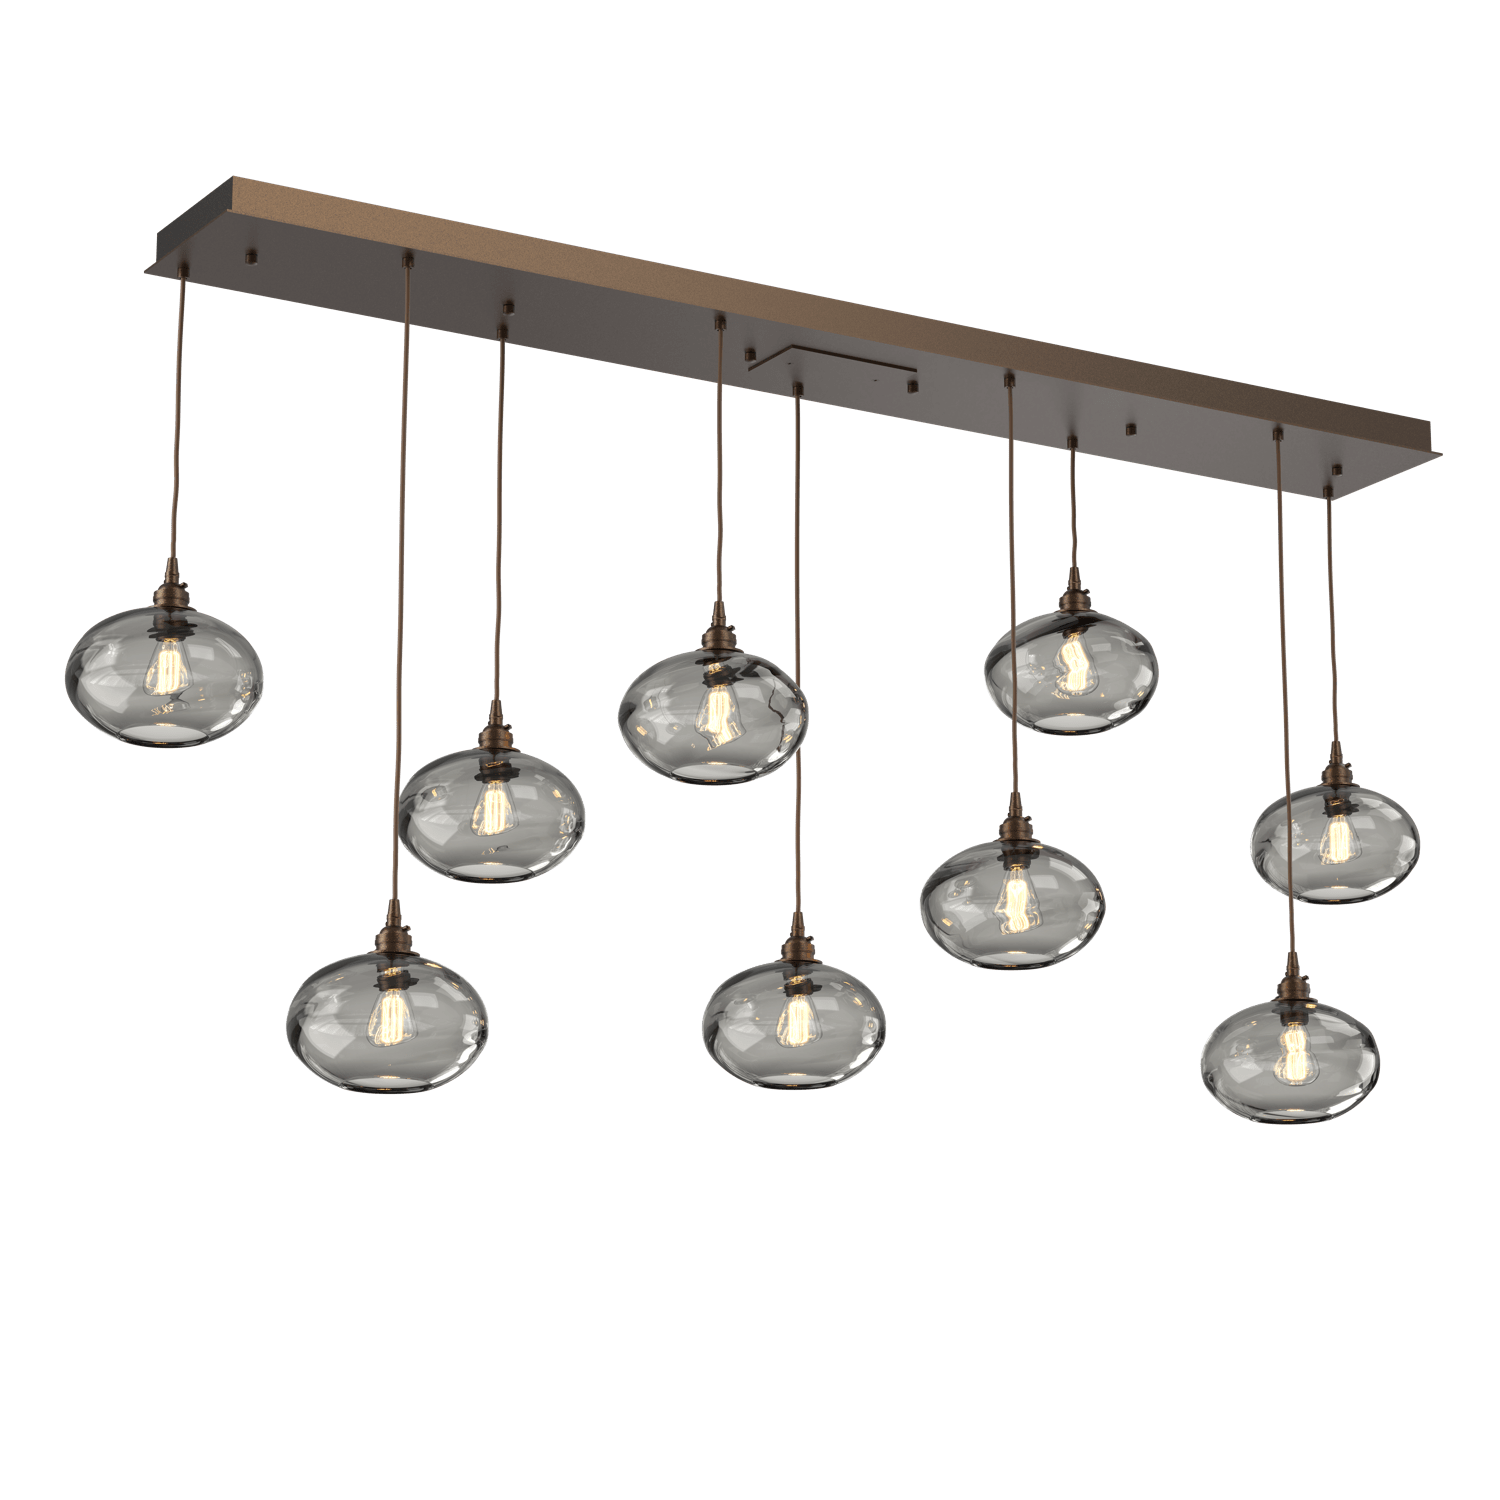 PLB0036-09-FB-OS-Hammerton-Studio-Optic-Blown-Glass-Coppa-9-light-linear-pendant-chandelier-with-flat-bronze-finish-and-optic-smoke-blown-glass-shades-and-incandescent-lamping